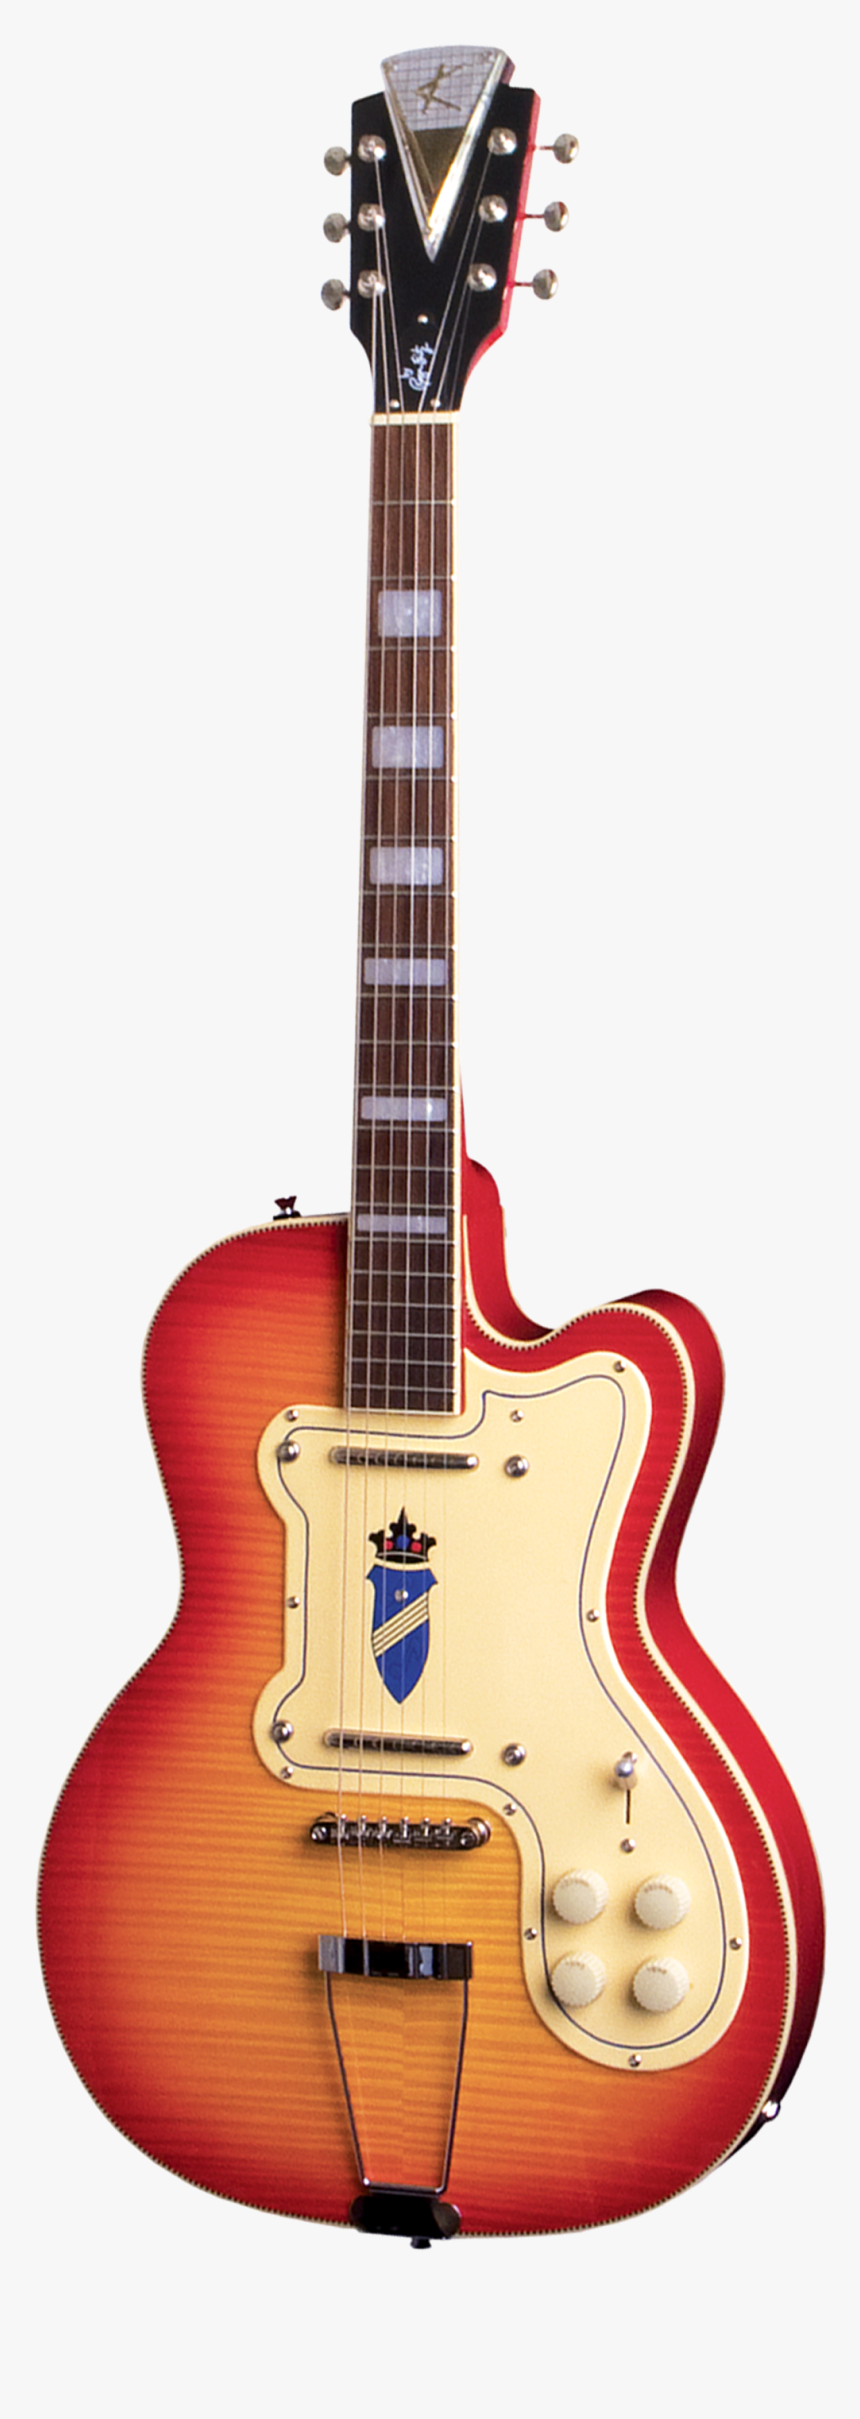 Cherry Guitar Amazon, HD Png Download, Free Download